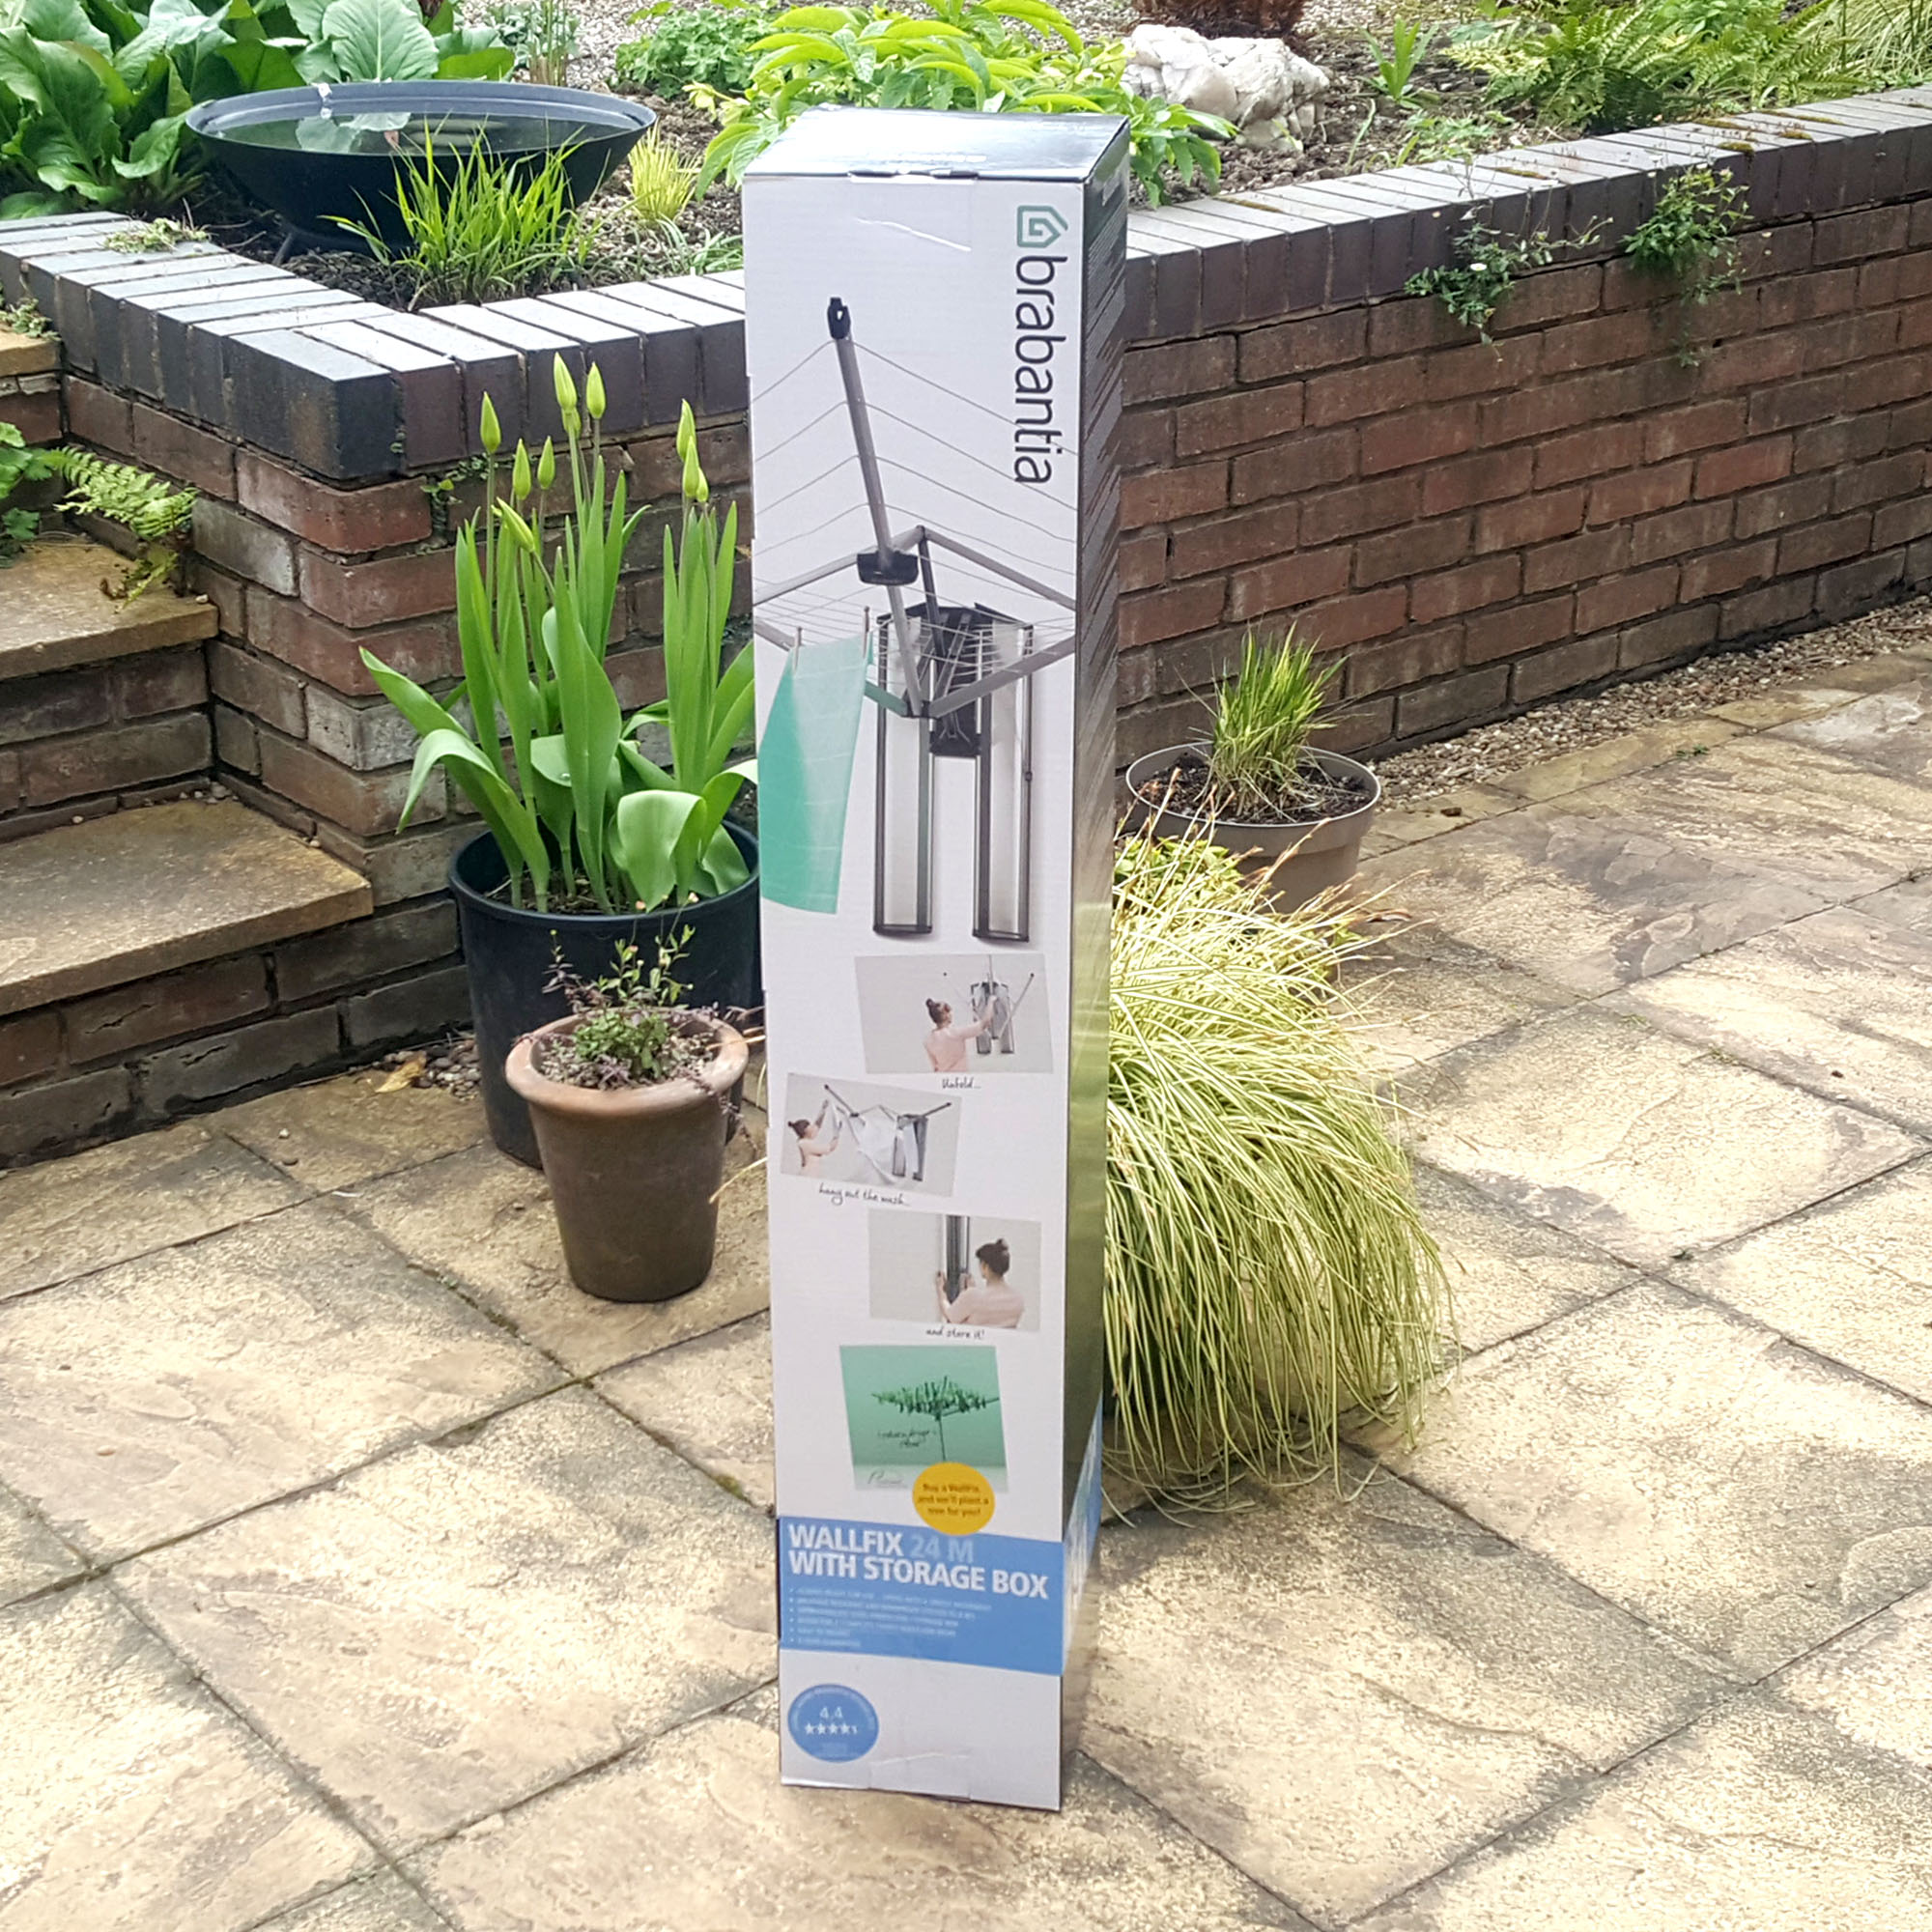 The Brabantia Wallfix Dryer boxed on a paved patio